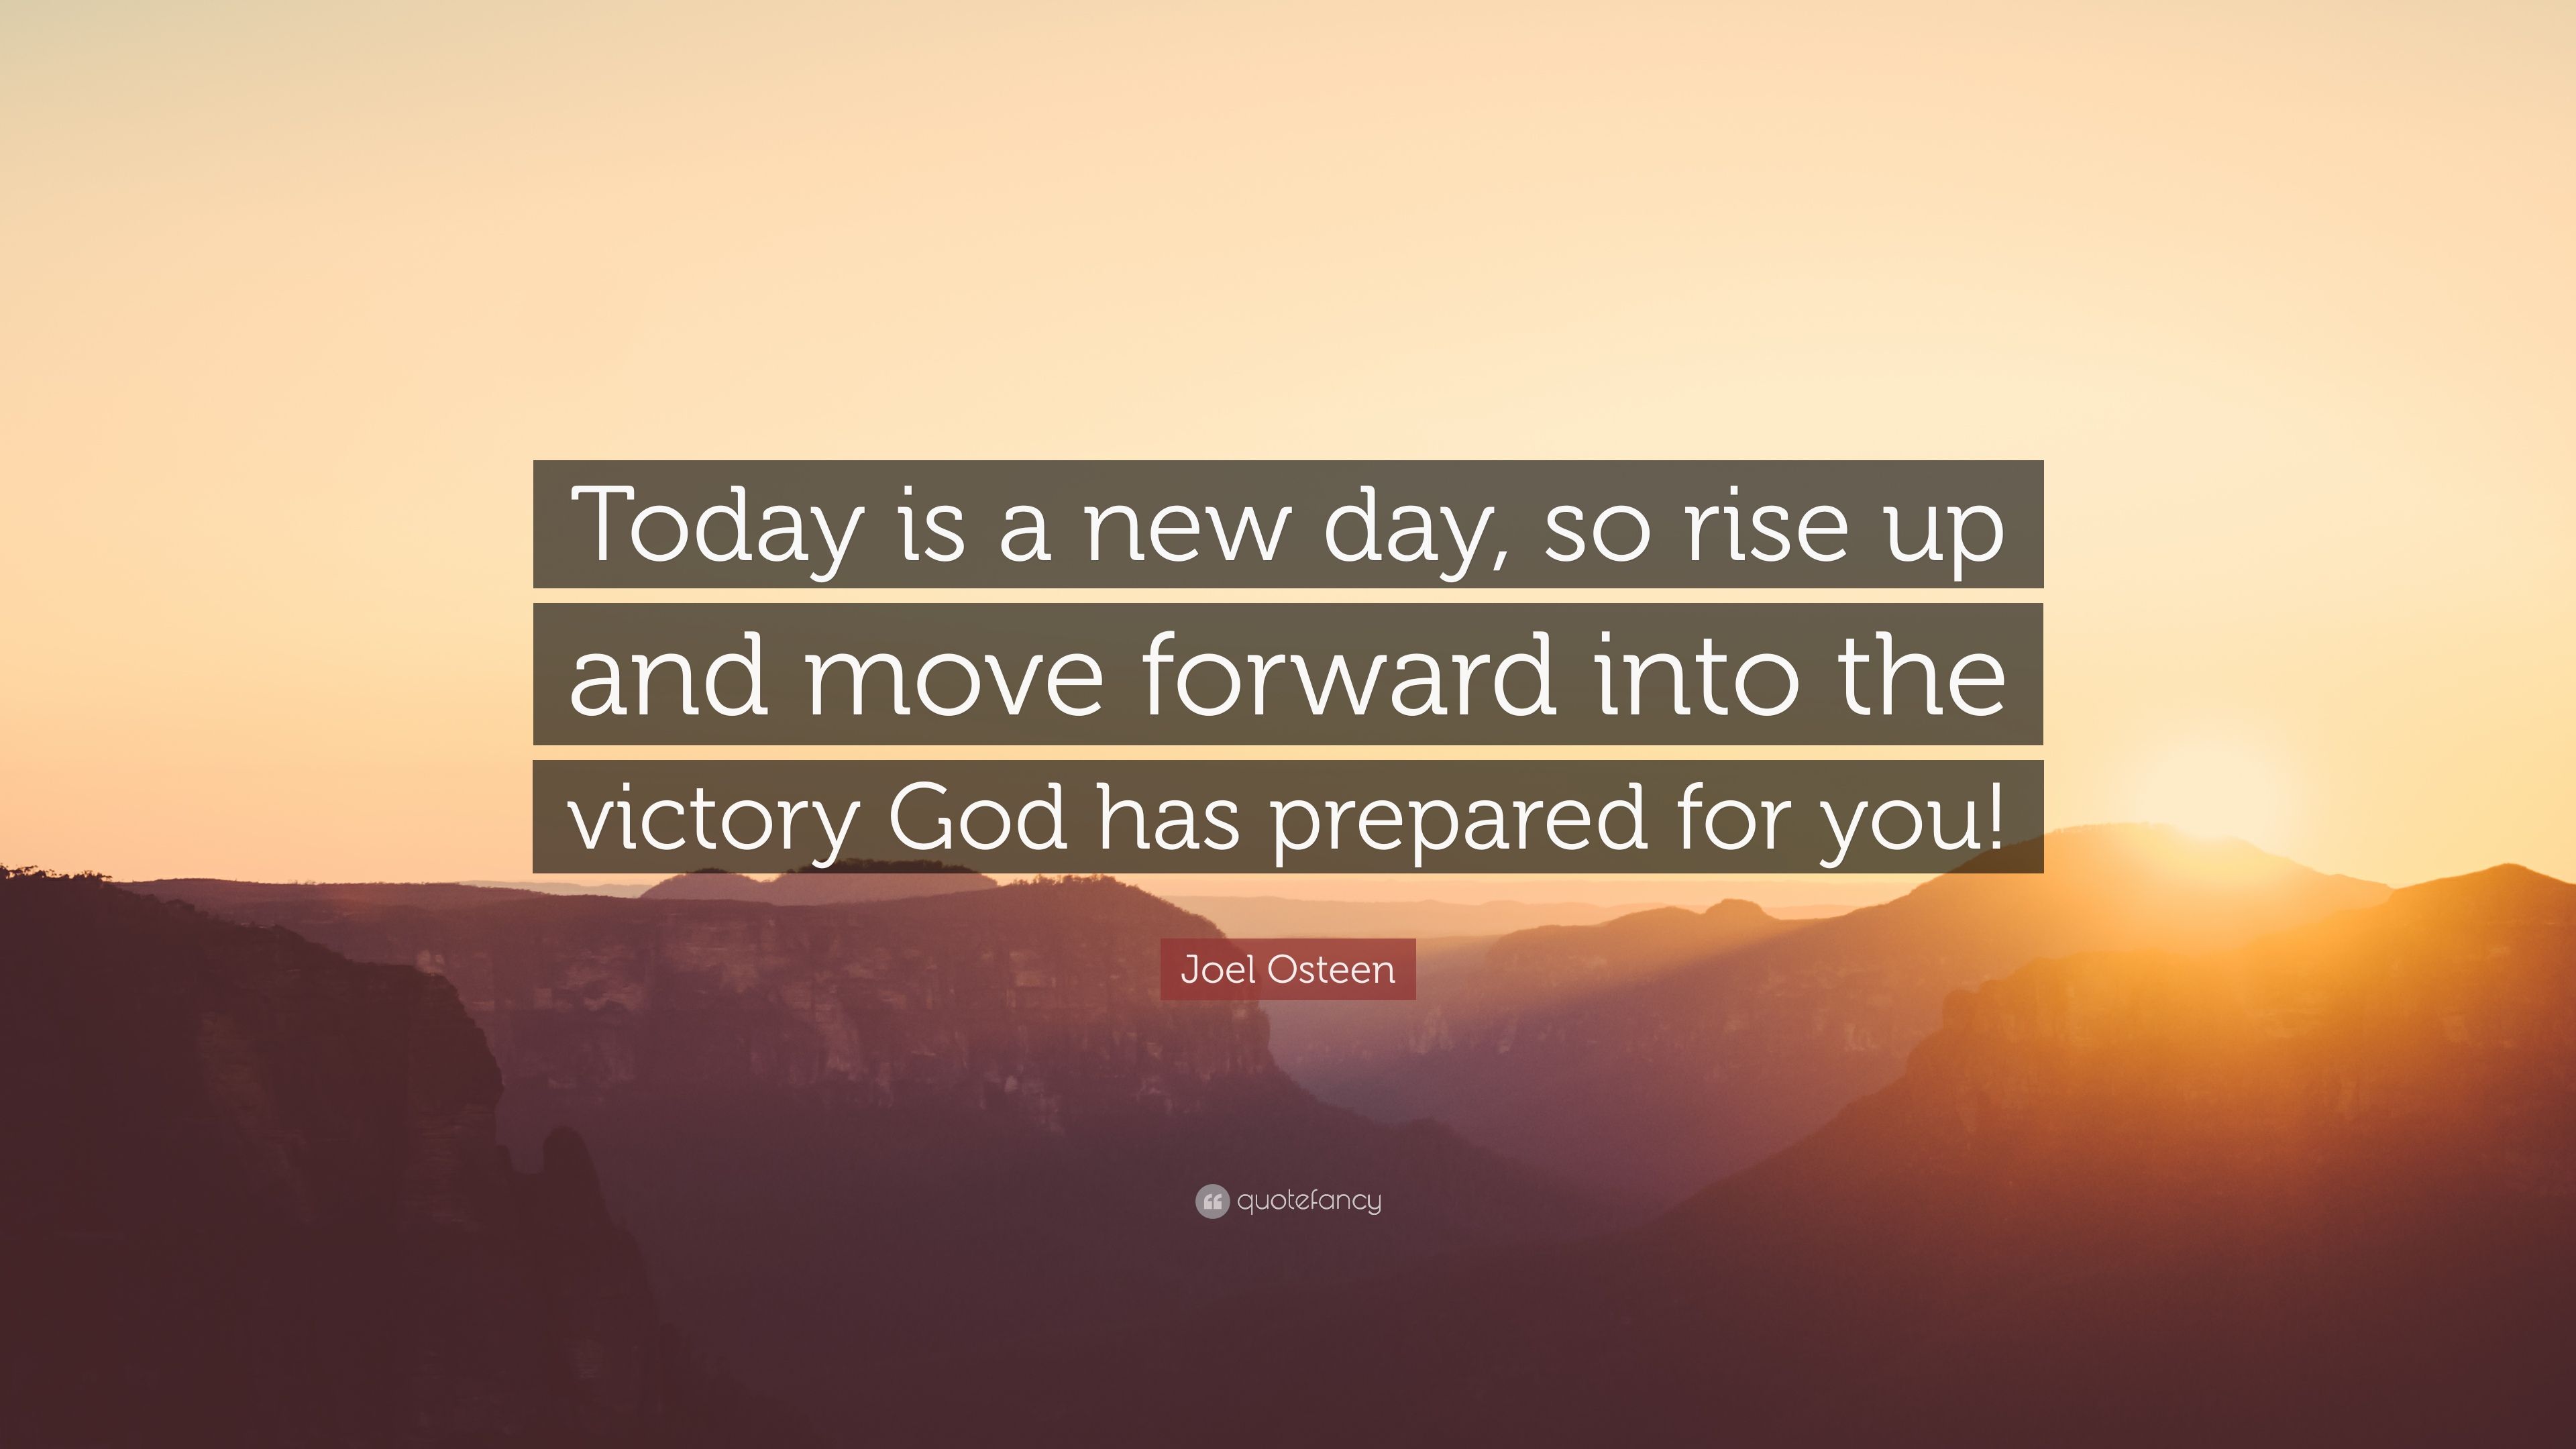 Joel Osteen Quote: “Today is a new day, so rise up and move forward into the victory God has prepared for you!” (19 wallpaper)